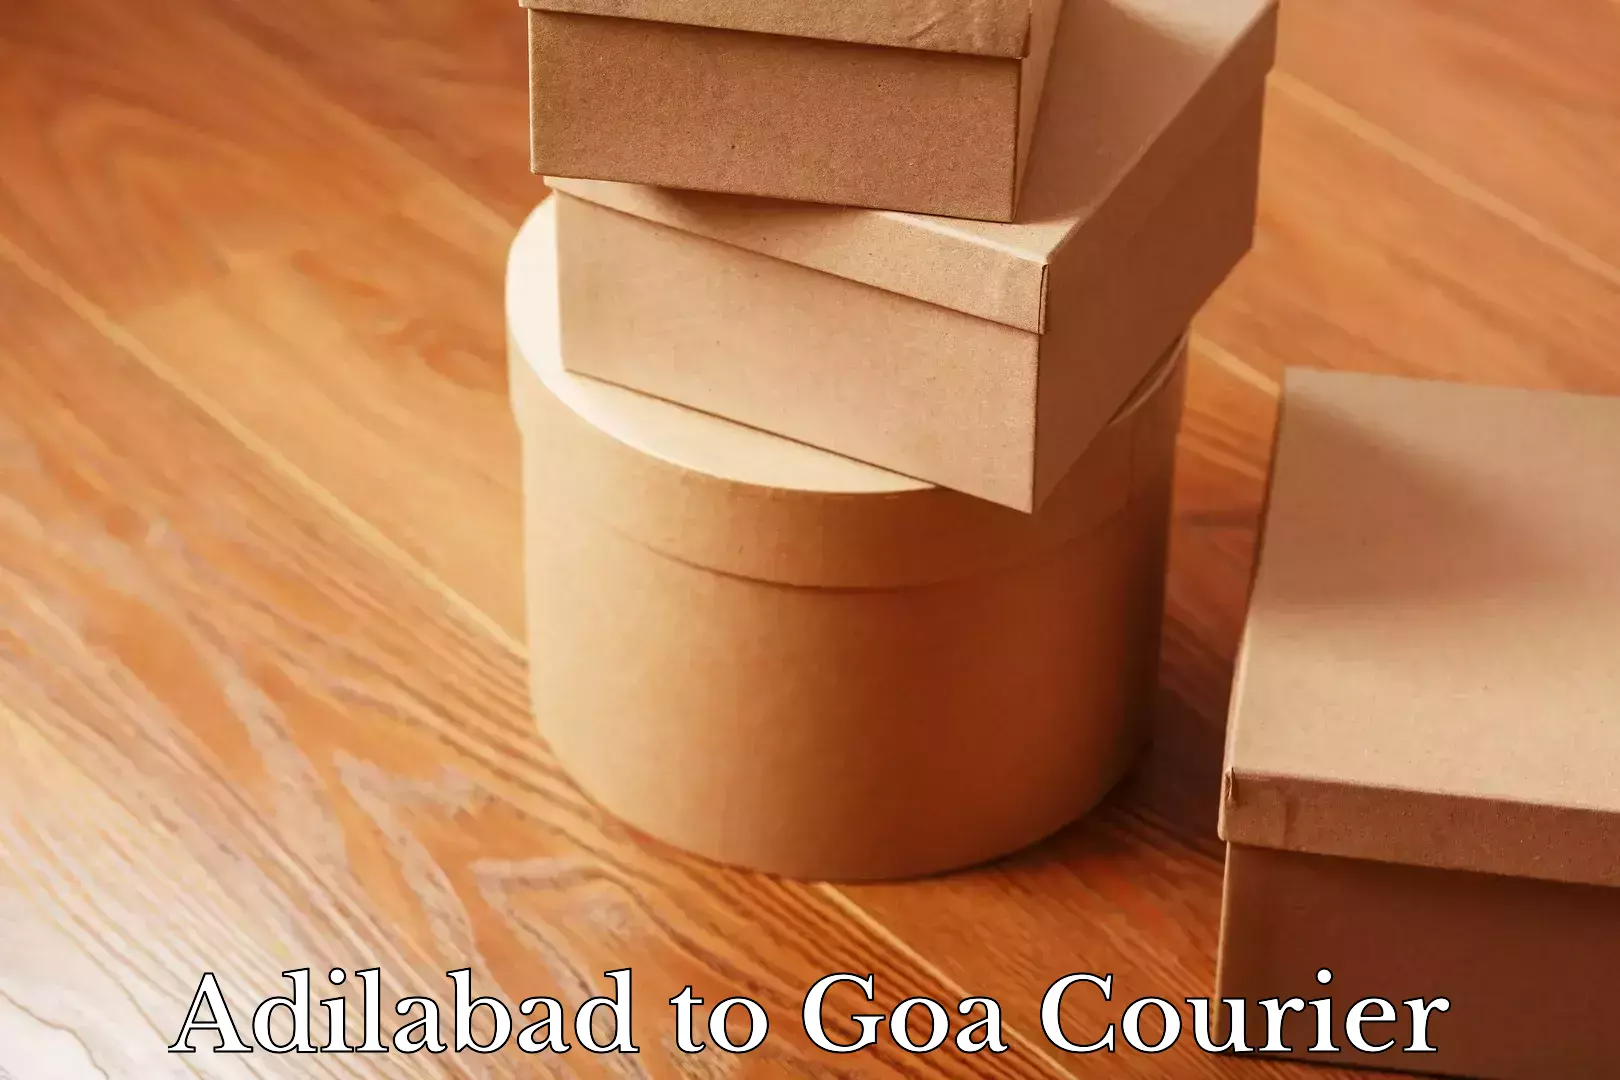 Nationwide delivery network Adilabad to Goa